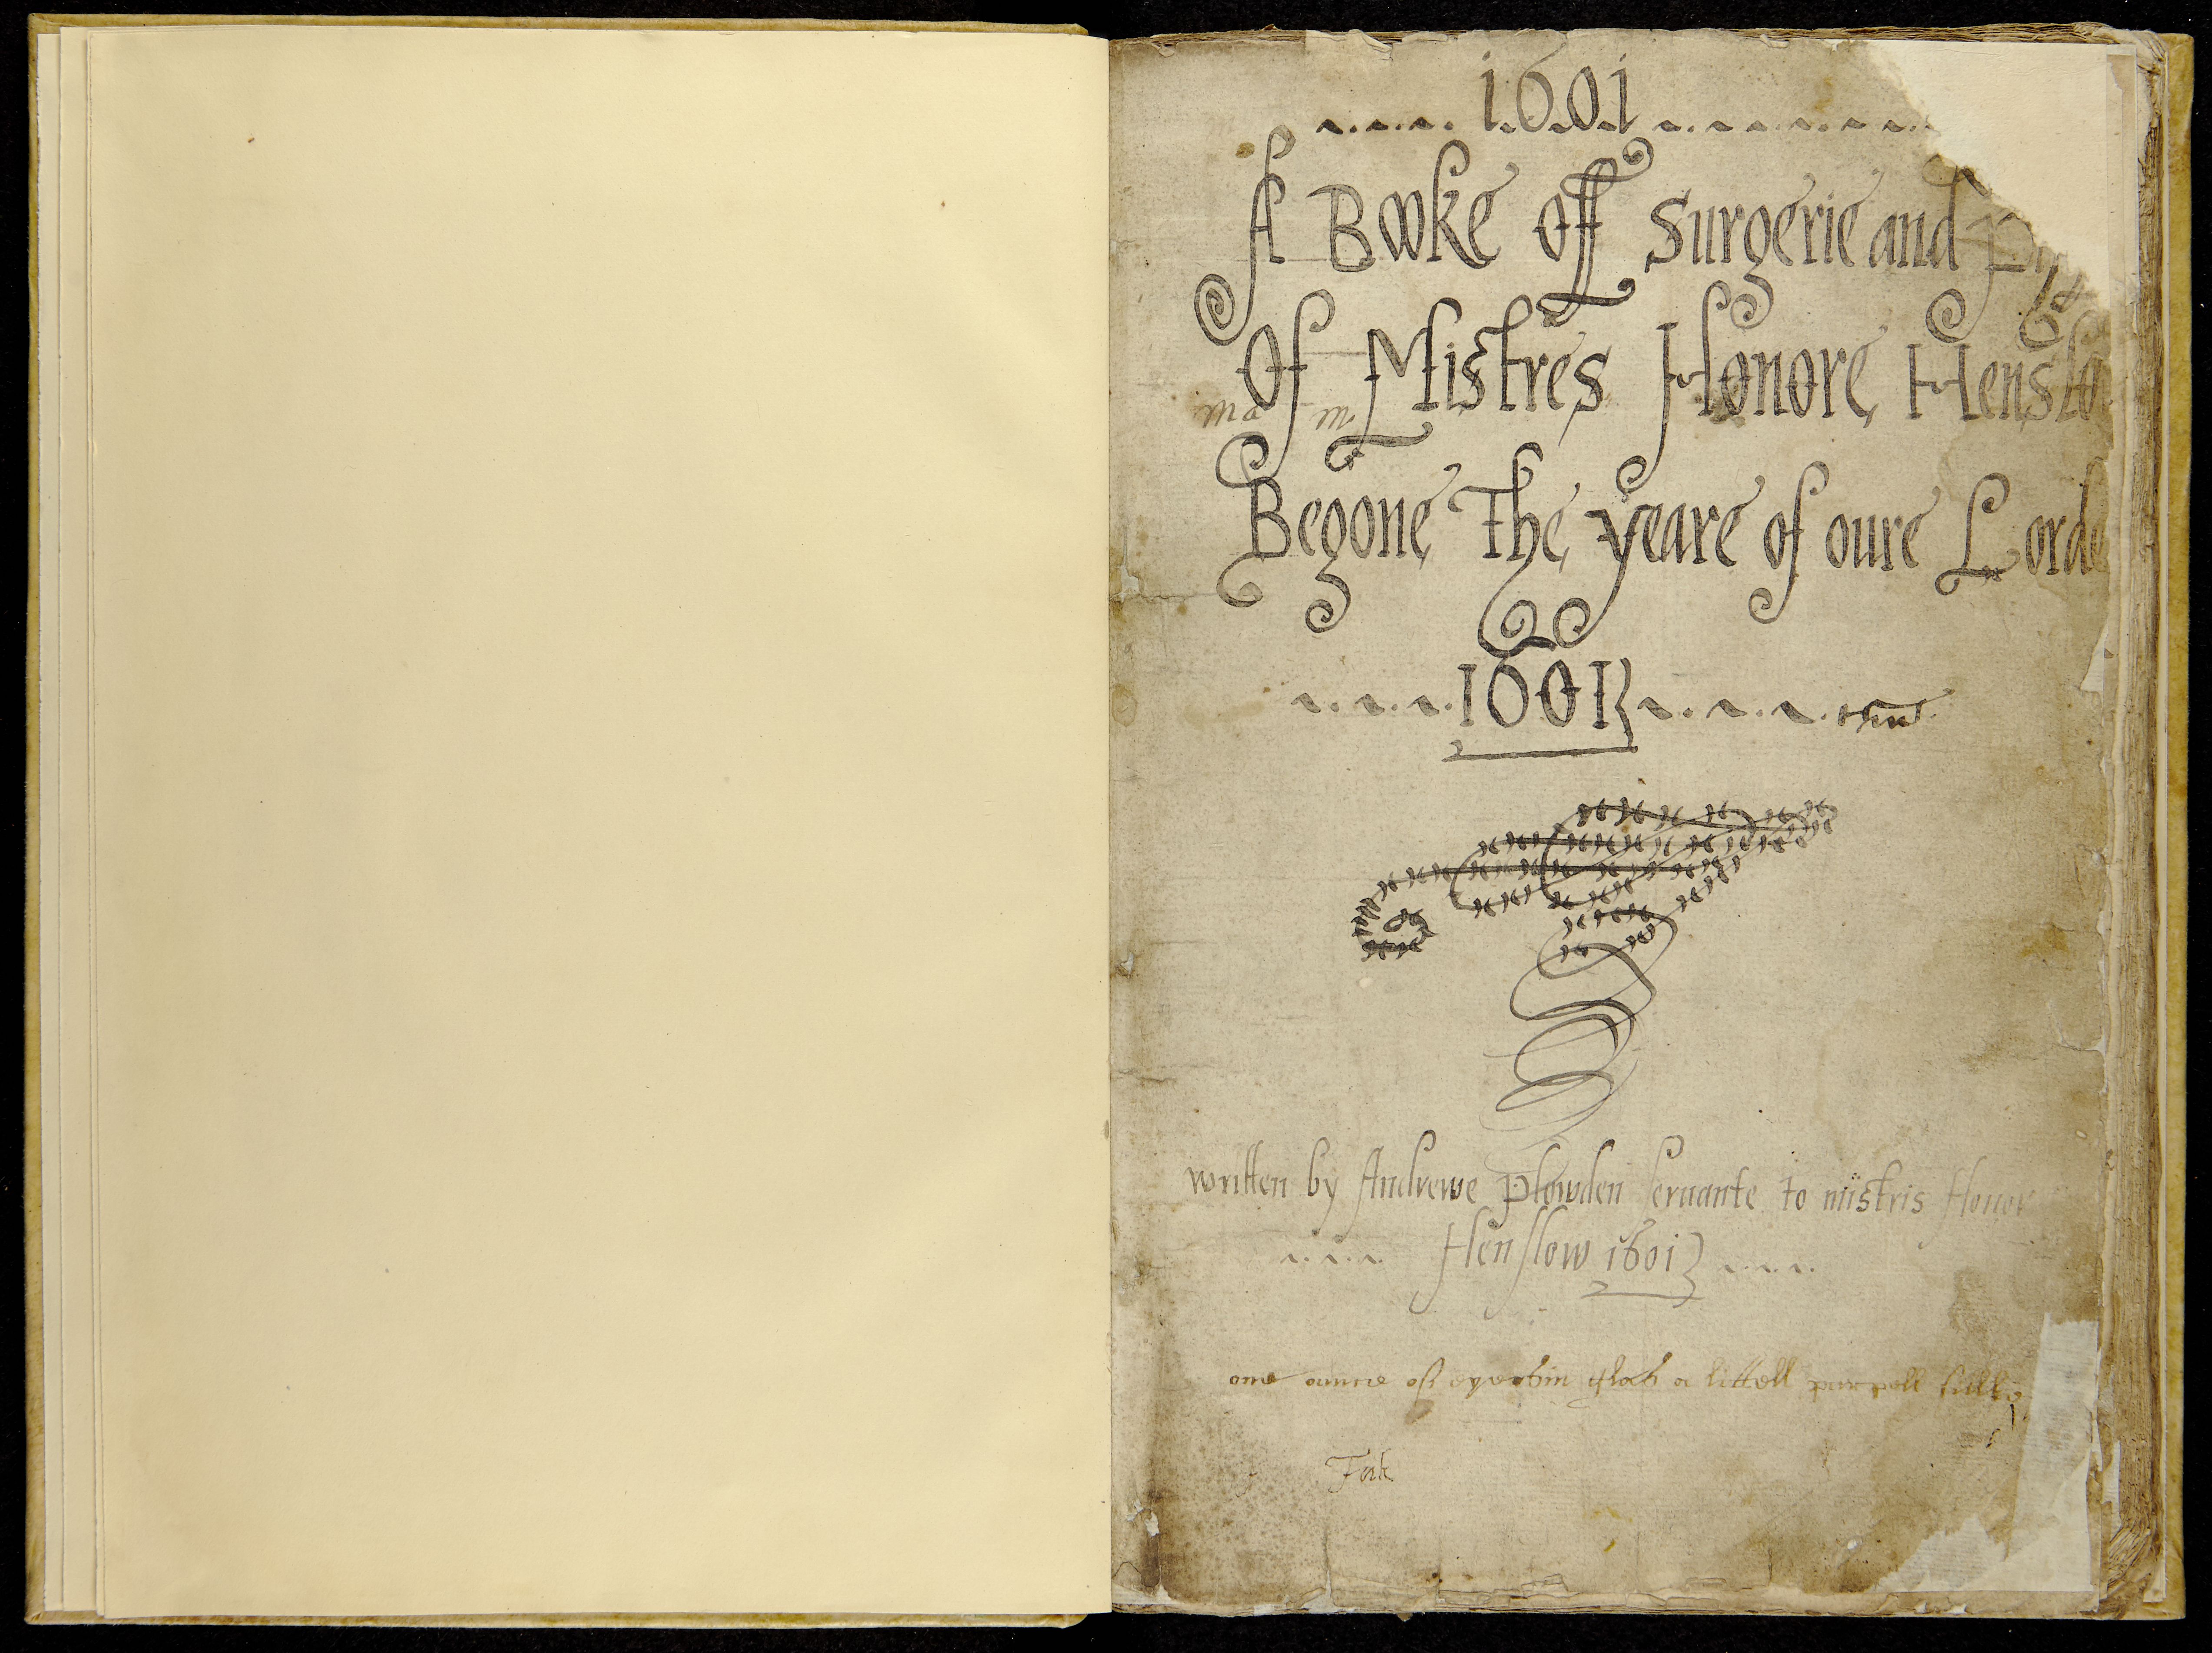 Title page of Honore Henslow’s book of medical and surgical recipes, 1601. MS688.